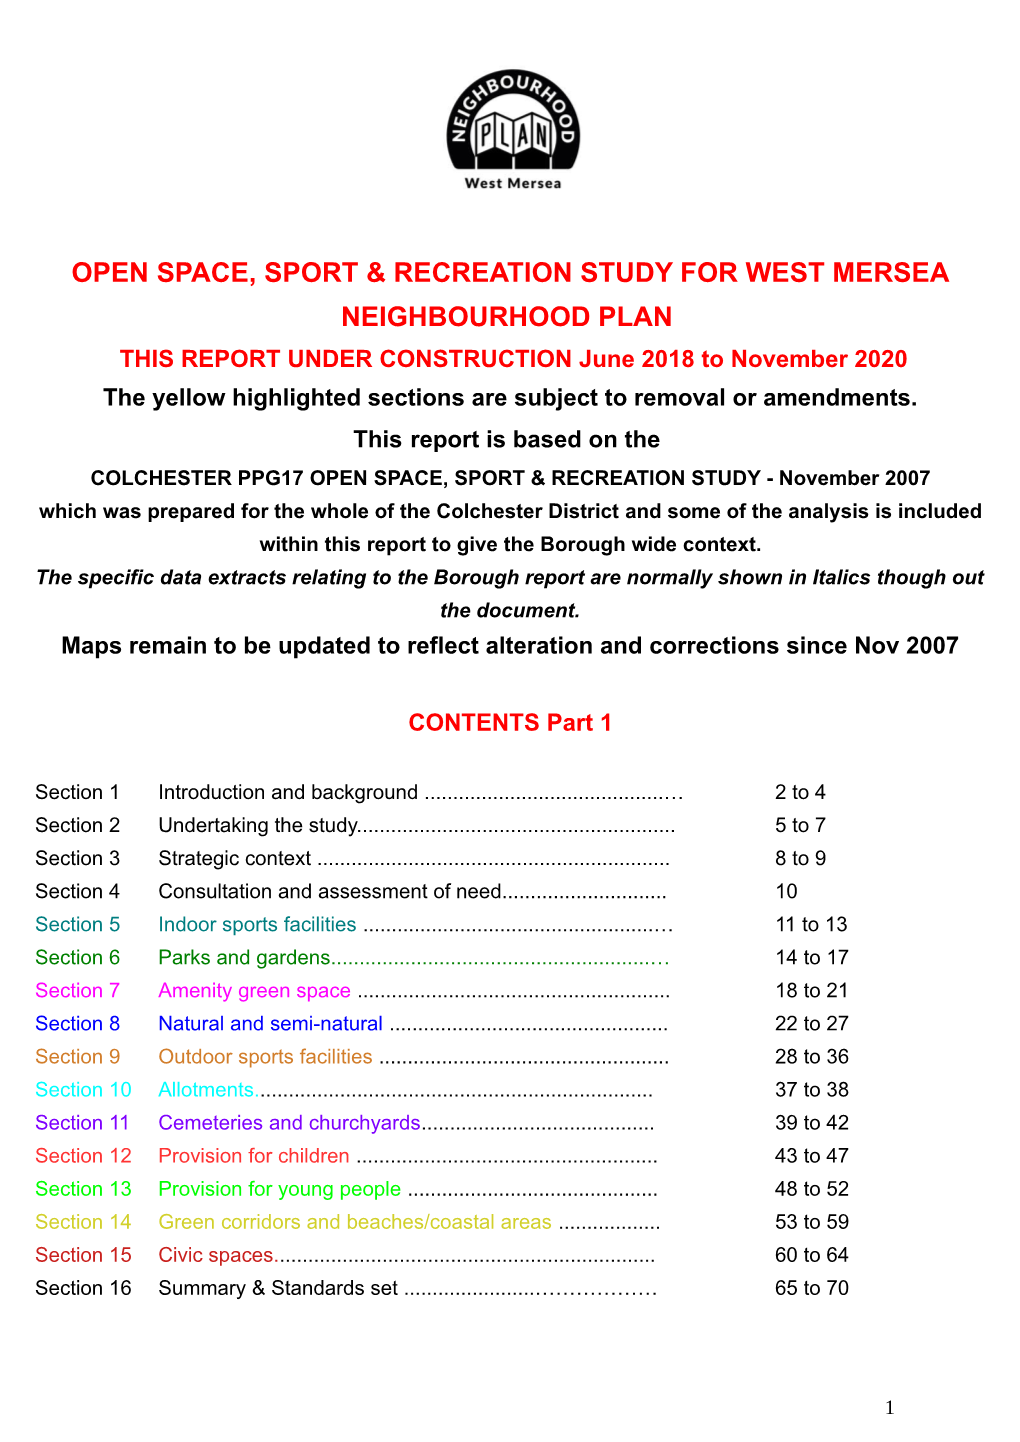 Open Space, Sport & Recreation Study for West